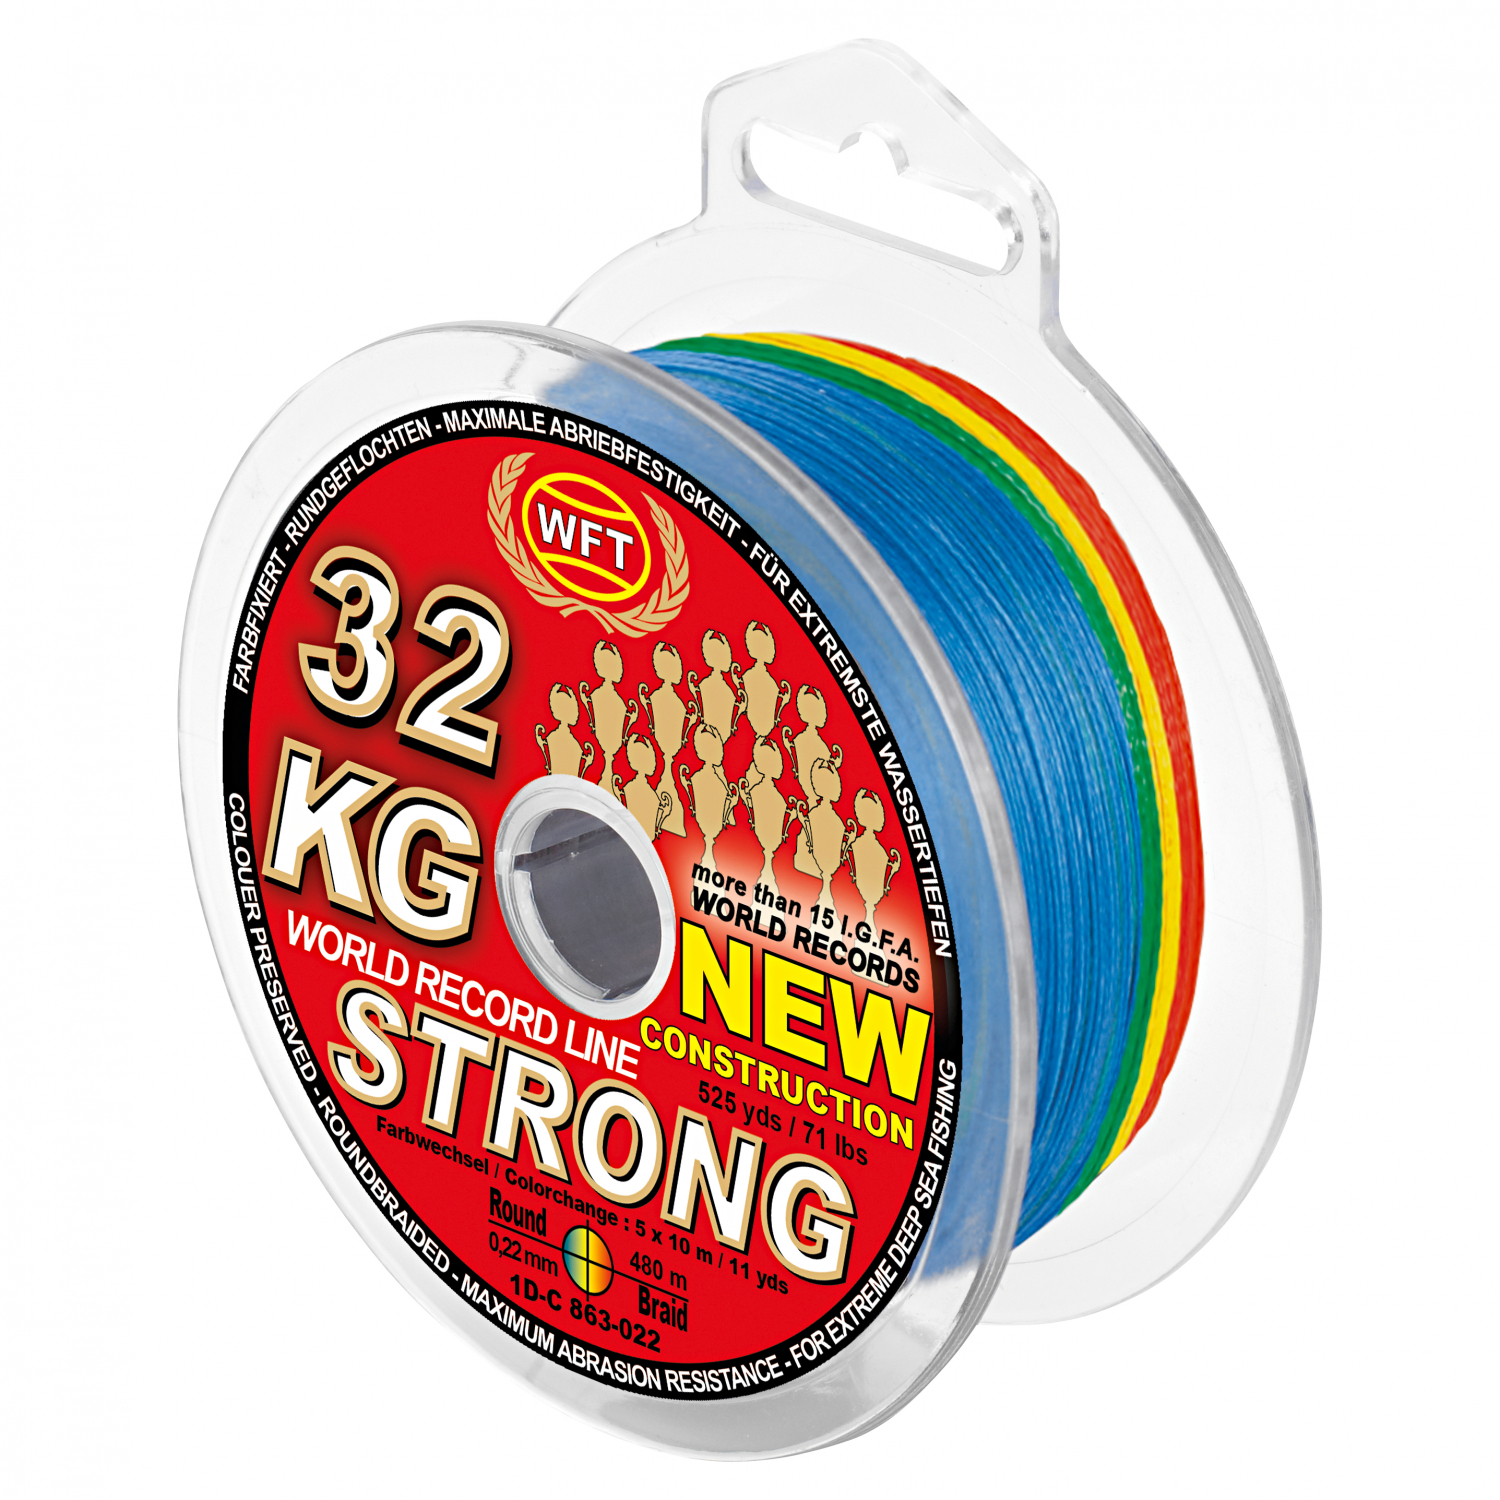 WFT Fishing Line KG Strong Exact at low prices